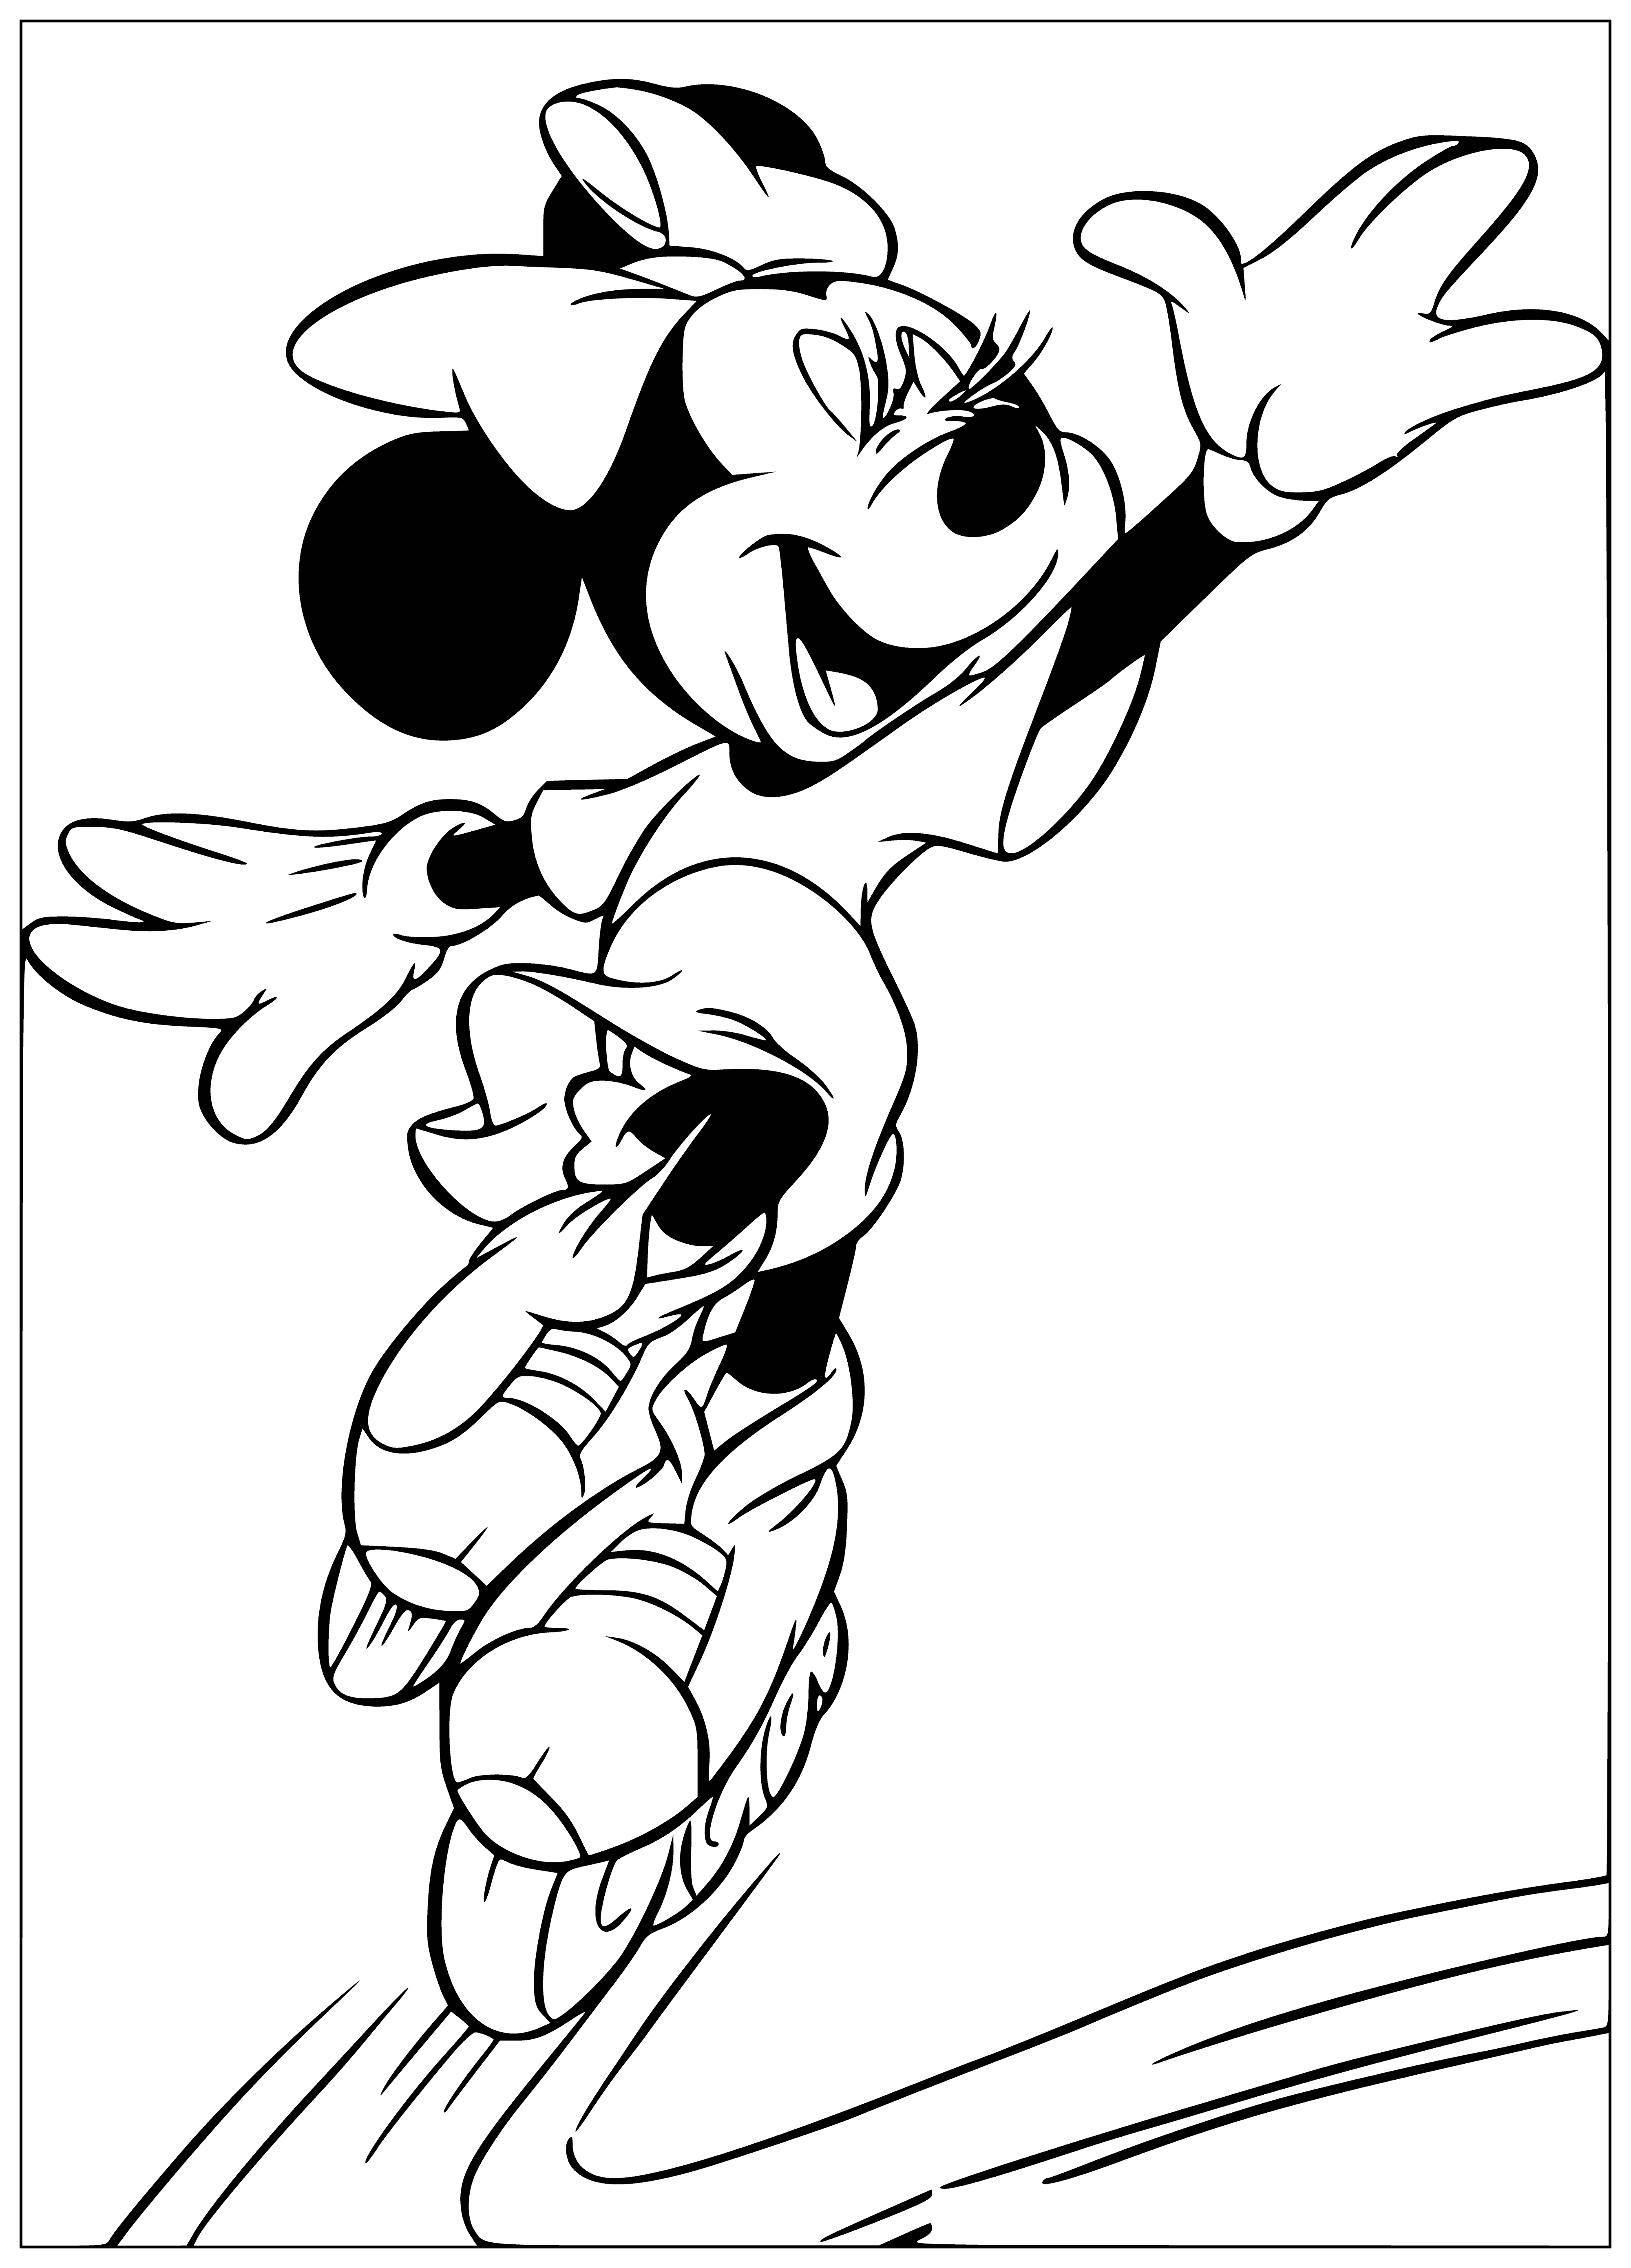 coloring page: 3 videos of Mickey, Donald & Goofy: "Classics" in B&W, "Fun & Games" in color, & "Adventures" in color on fun adventures.